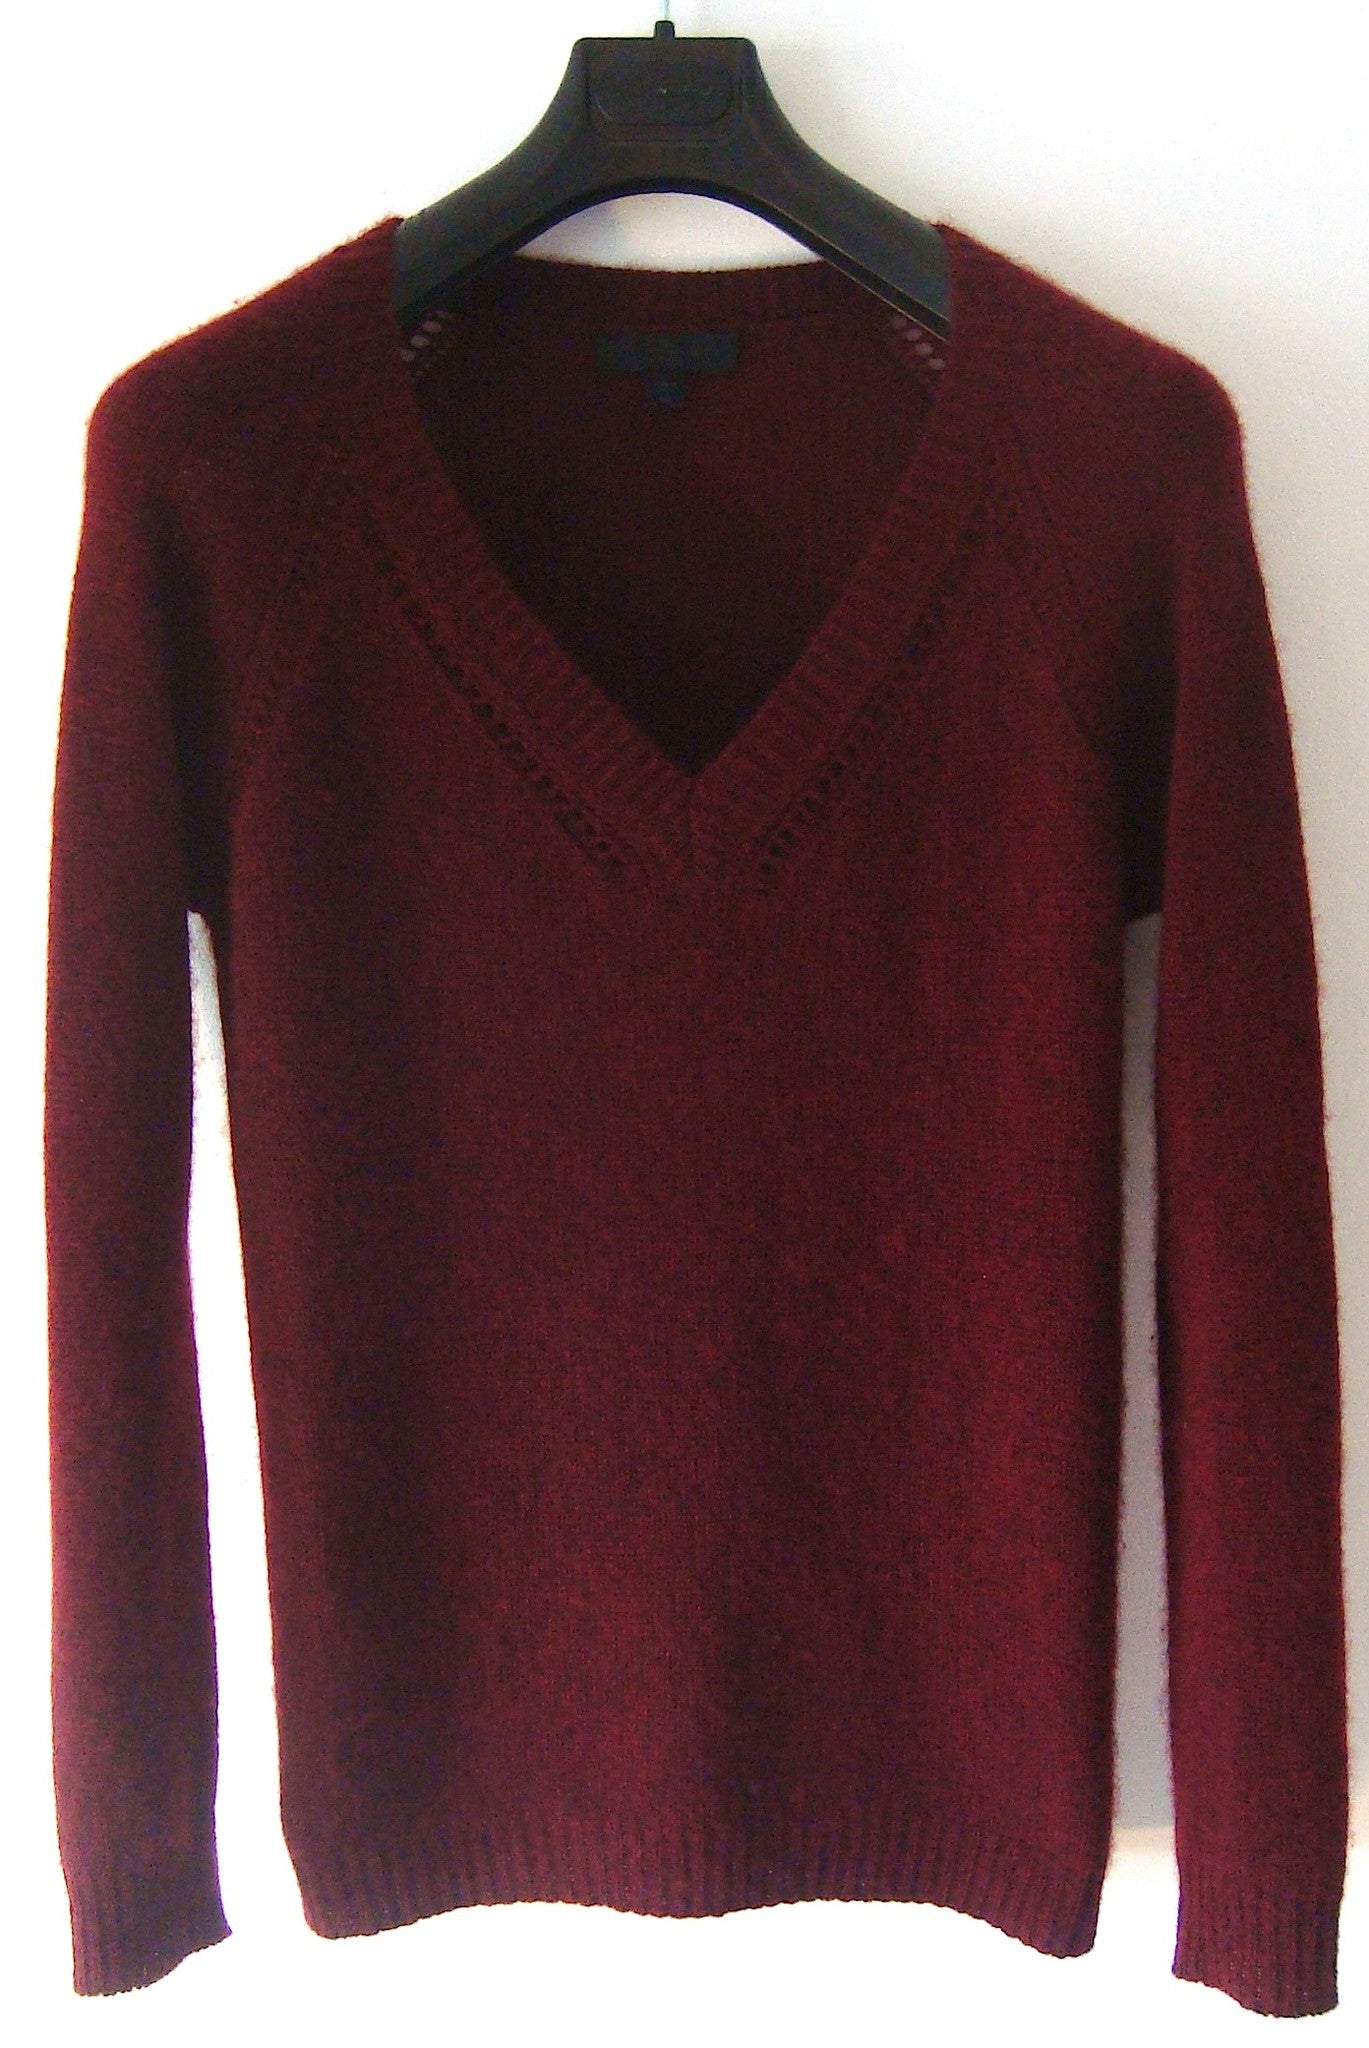 2012 Cashmere Sweater with Crochet Detailing